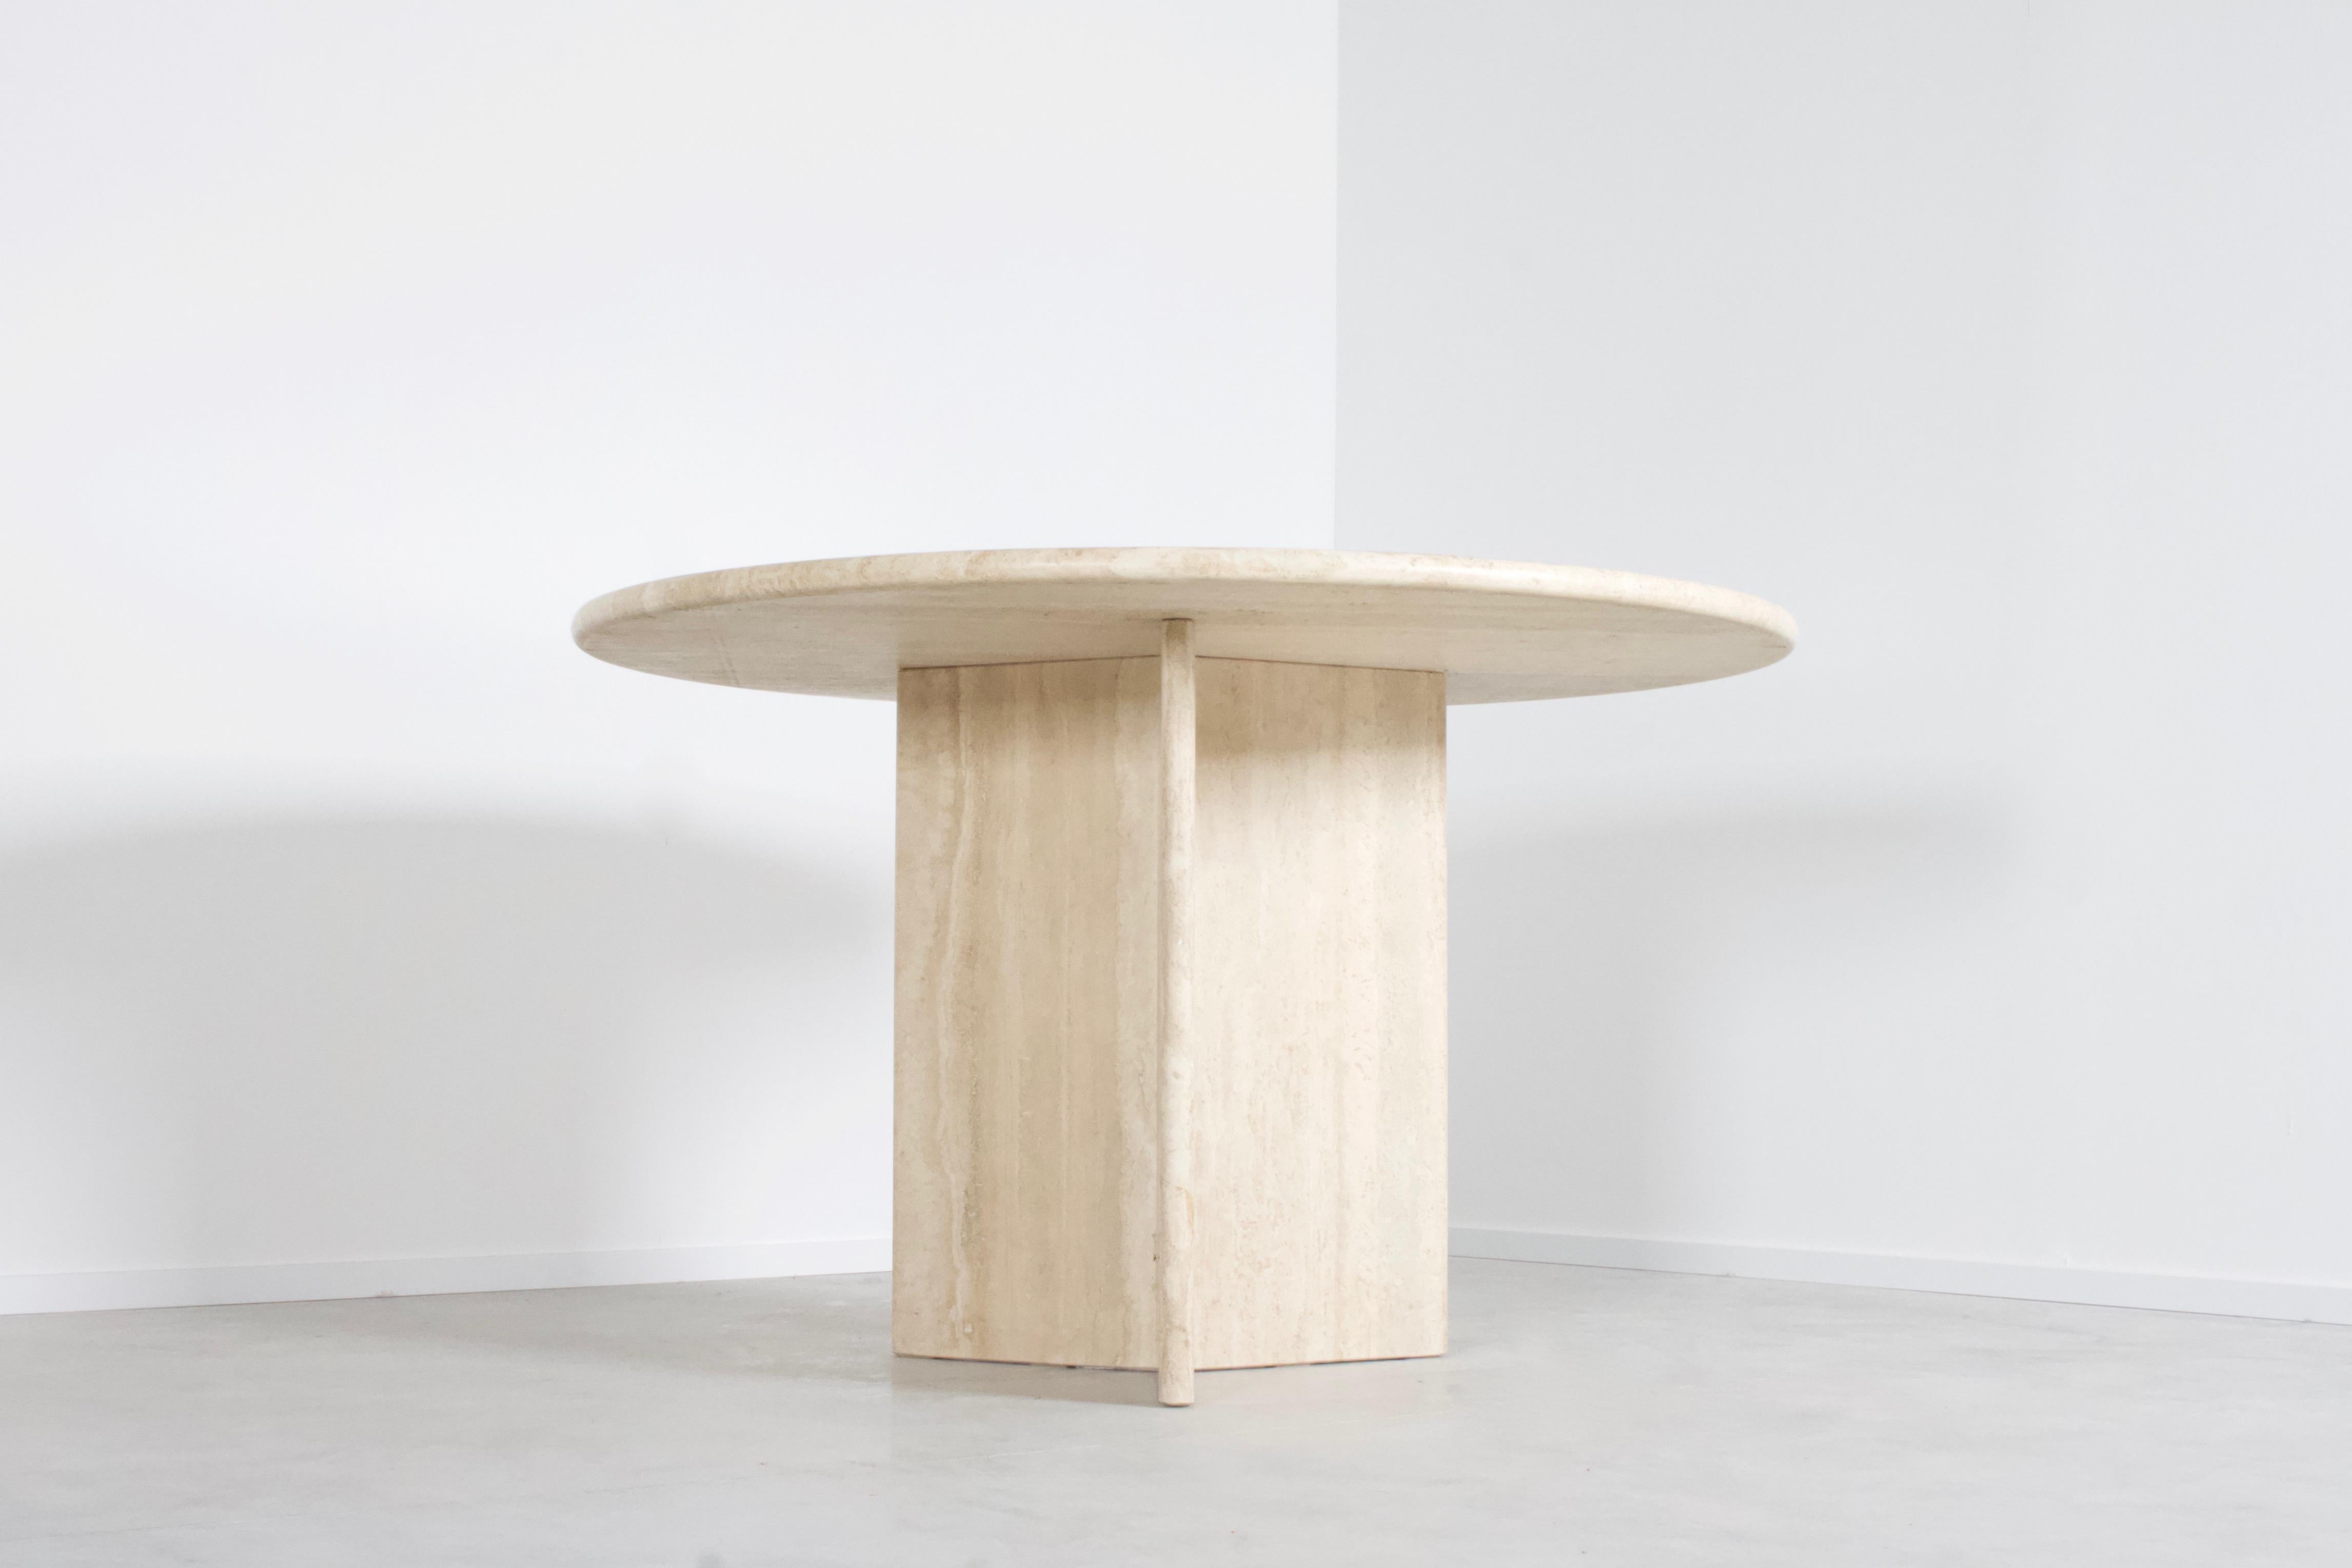 Round travertine dining table in very good condition.

The table has a round travertine top.

The base is formed of three slabs of travertine, which combine into a triangle or star shape.

The travertine surface is absolutely breathtaking and